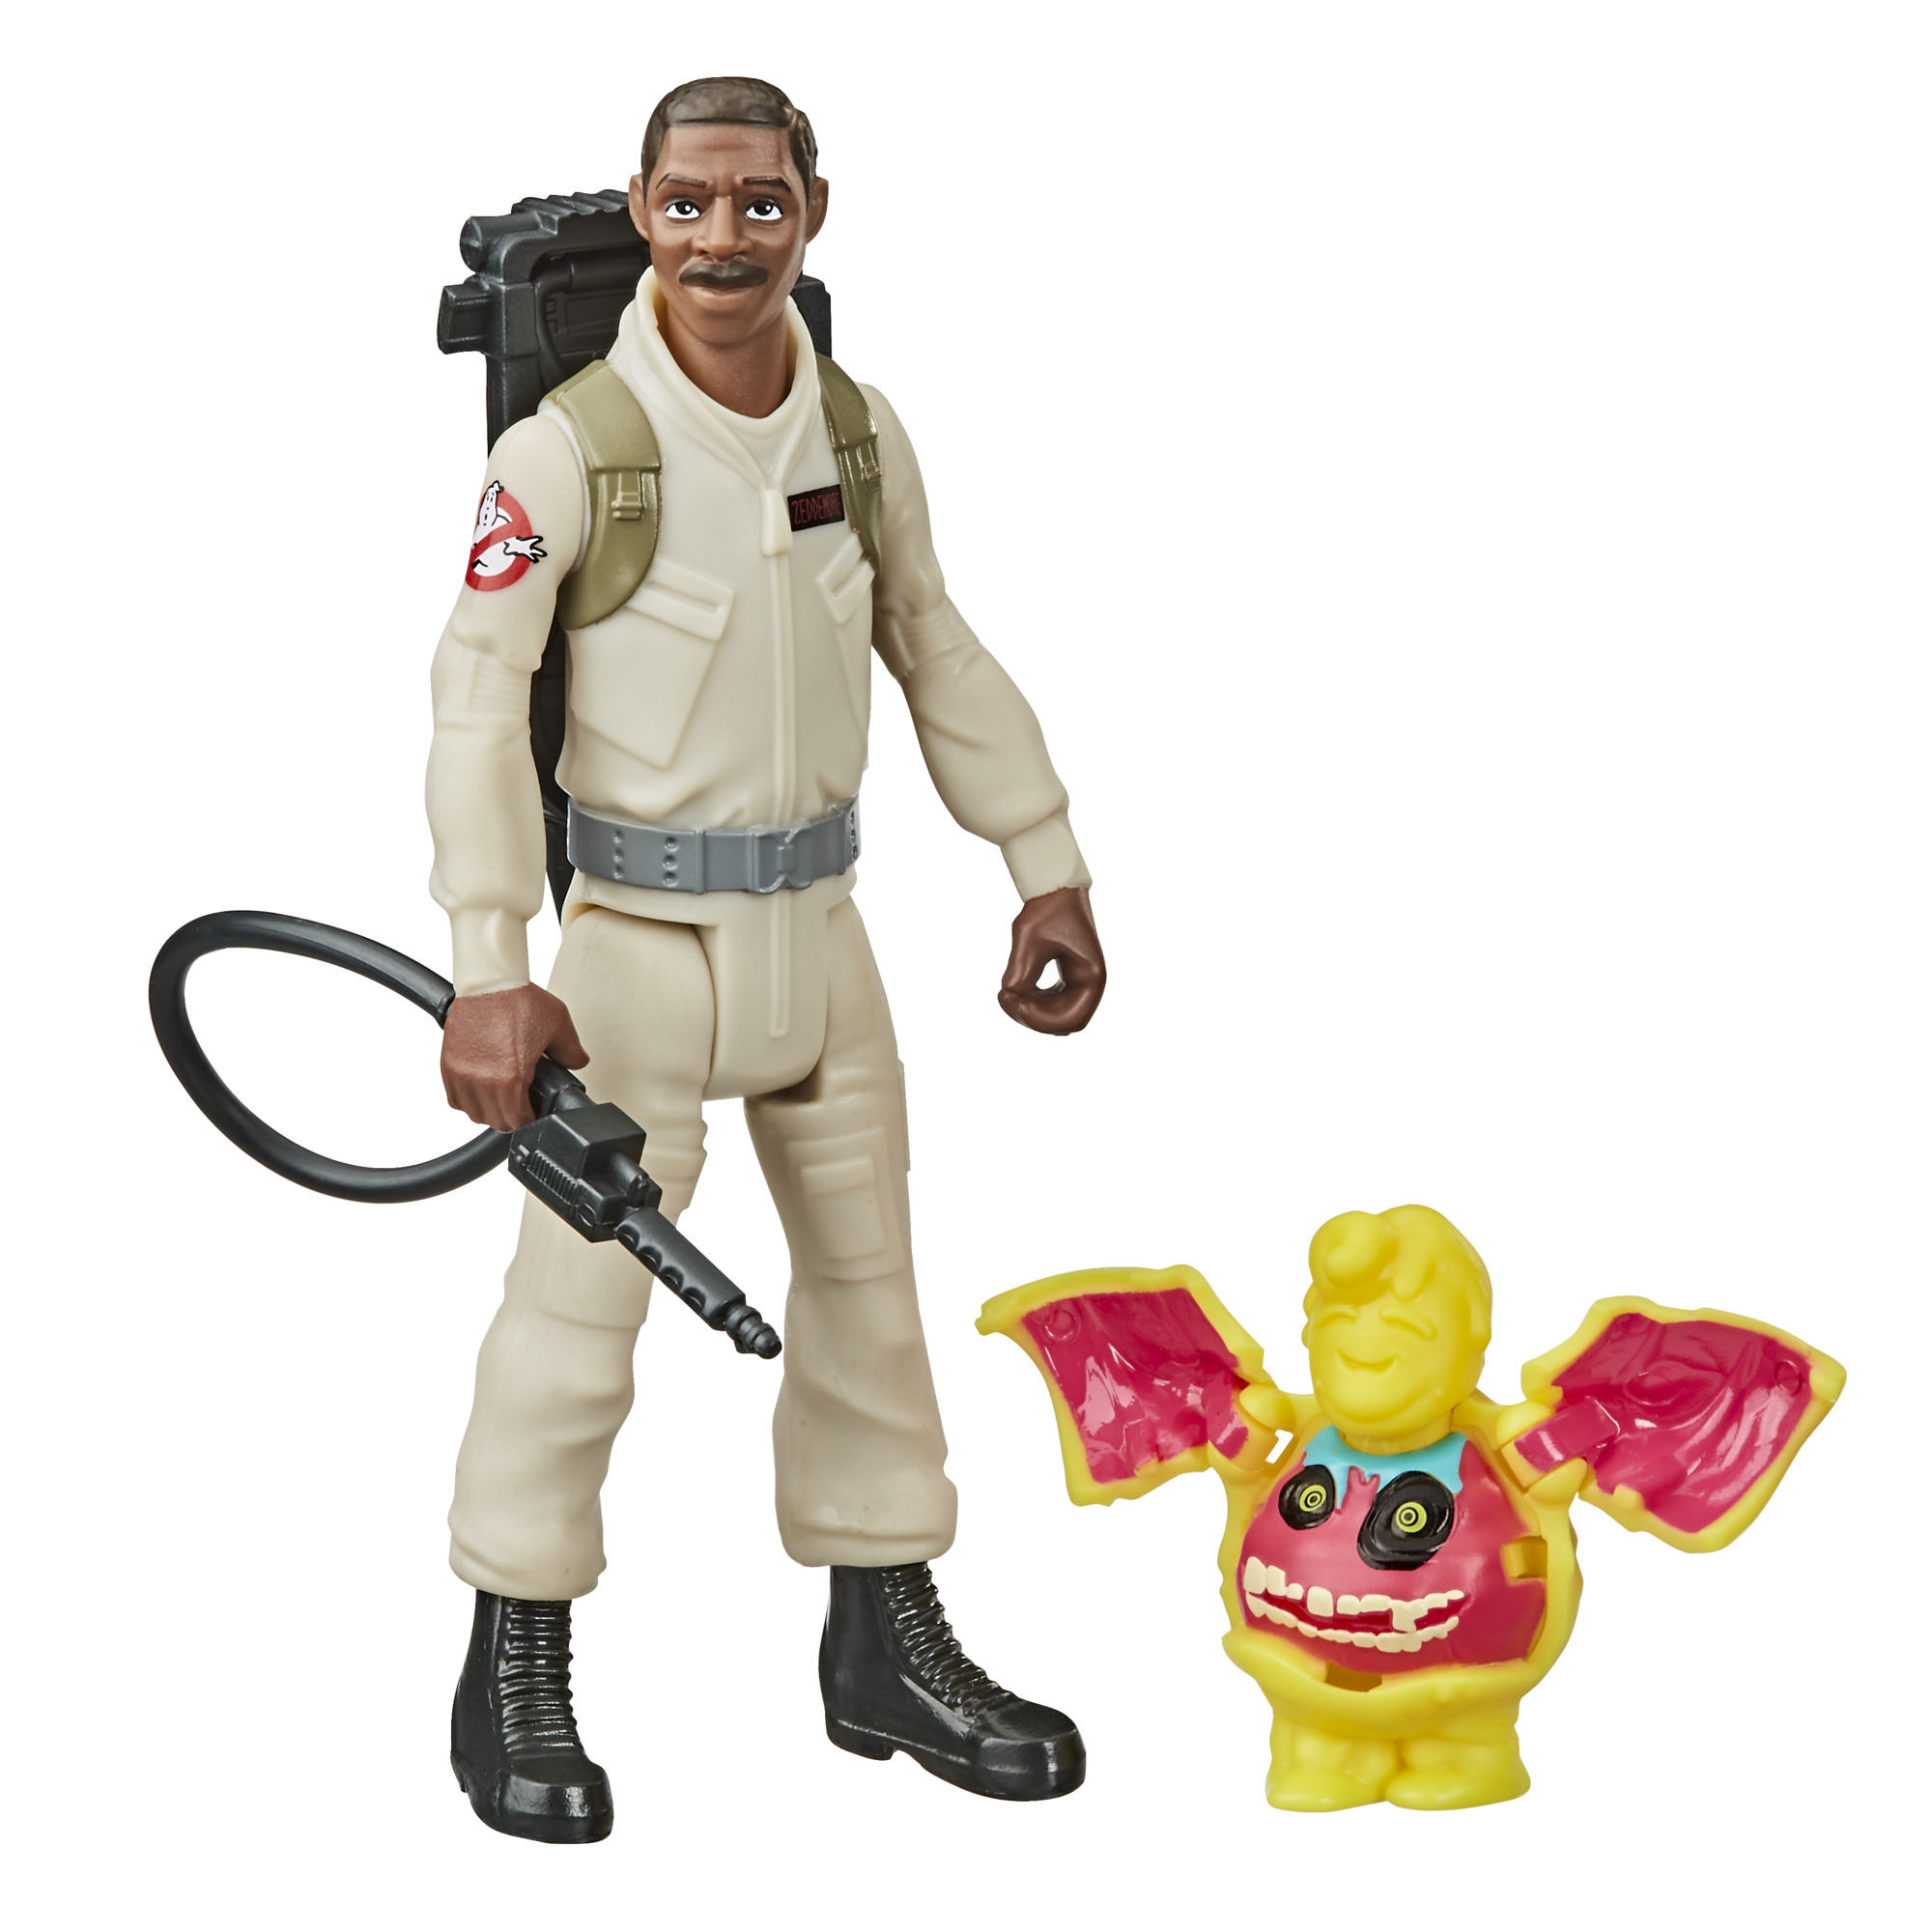 Ghostbusters Fright Features Winston Zeddemore Figure and Interactive Ghost Figure and Accessory for Kids Ages 4 and Up